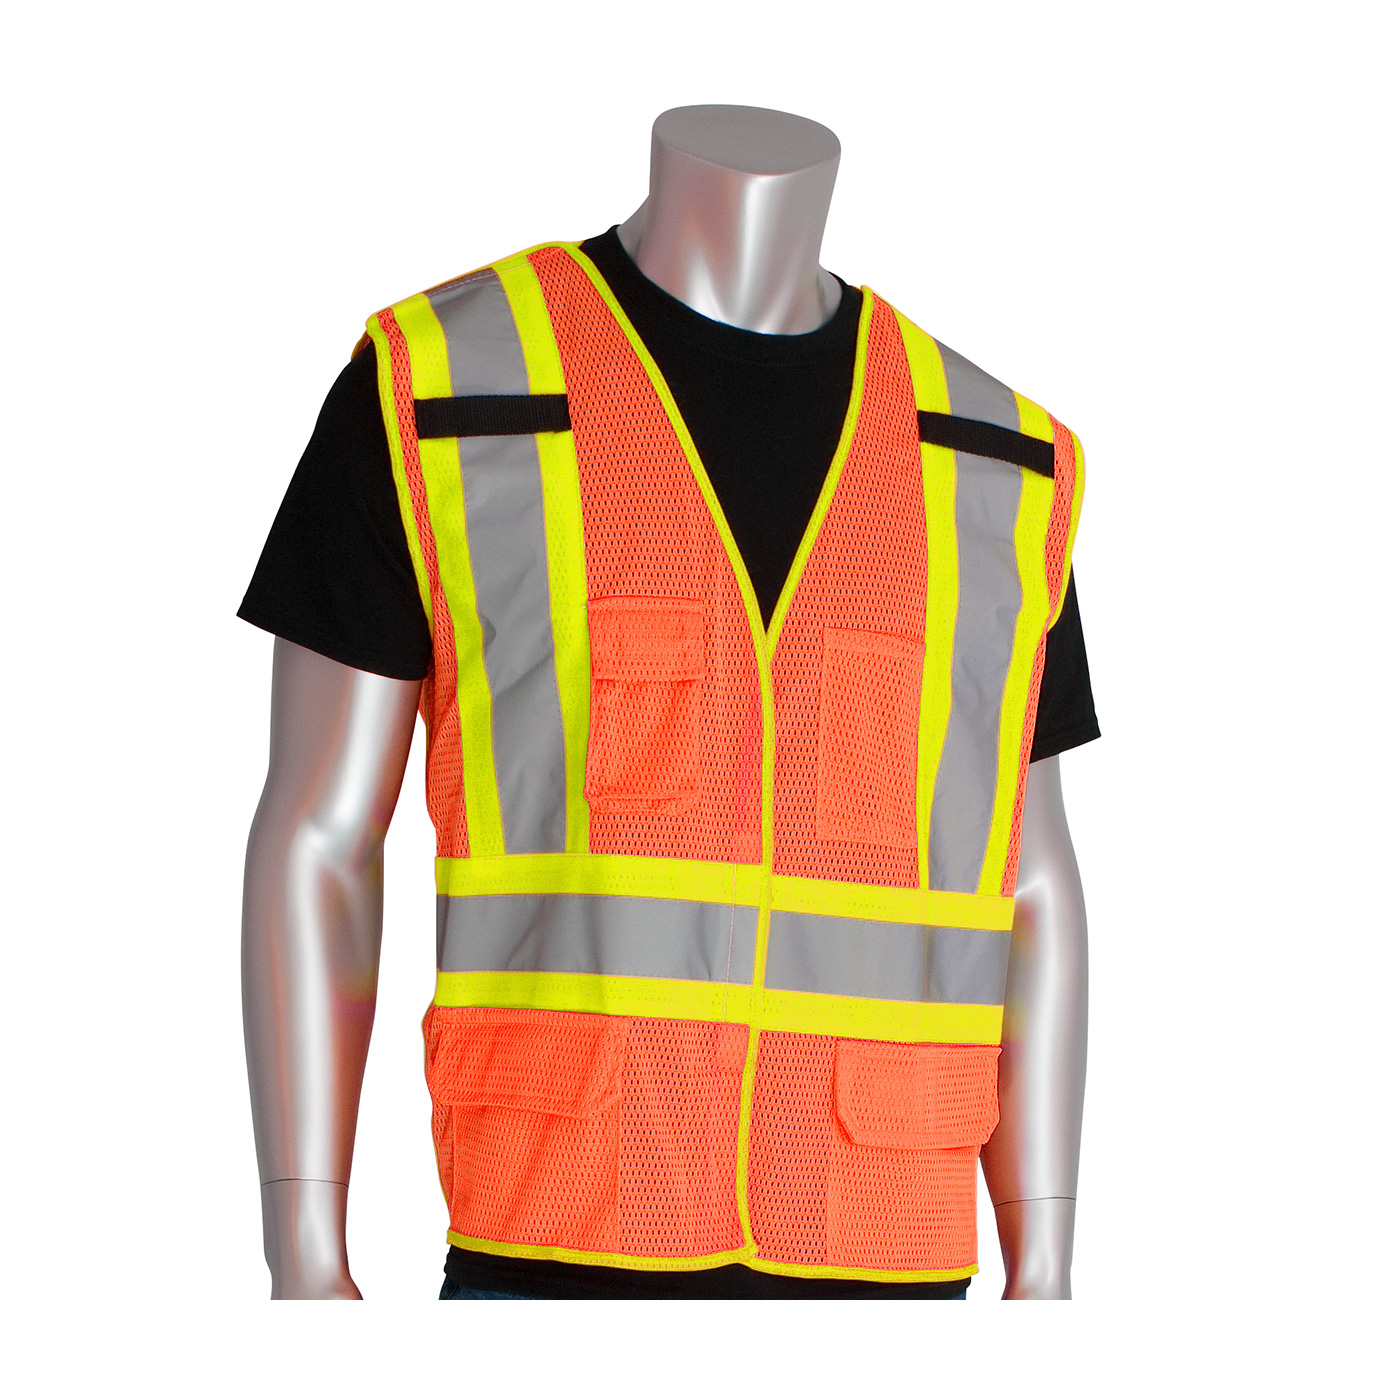 PIP® ANSI Type R Class 2 and CAN/CSA Z96 Two-Tone X-Back Breakaway Mesh Vest #302-0211OR